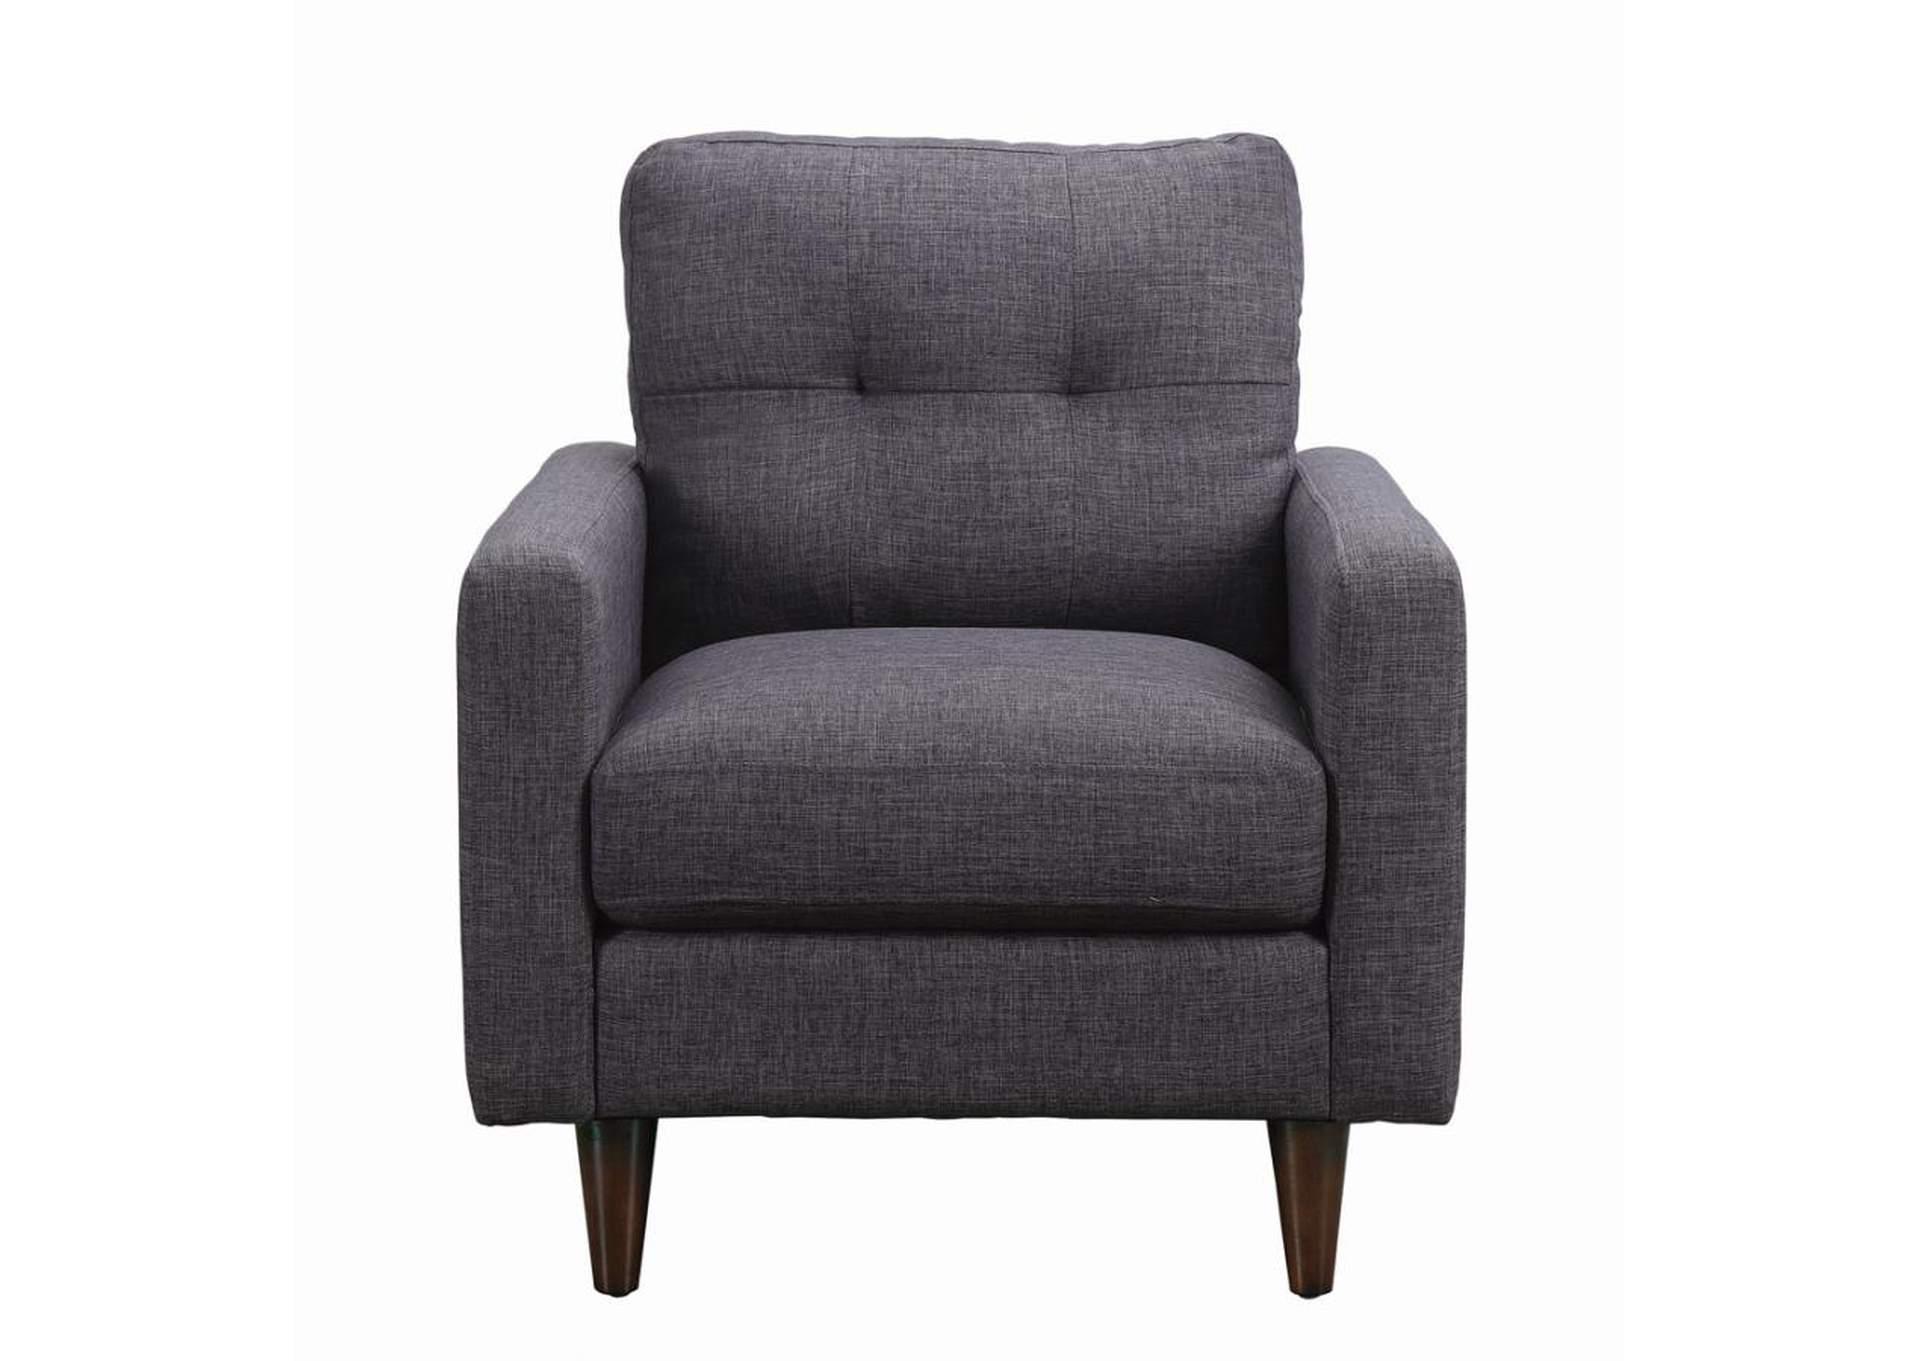 Watsonville Tufted Back Chair Grey,Coaster Furniture